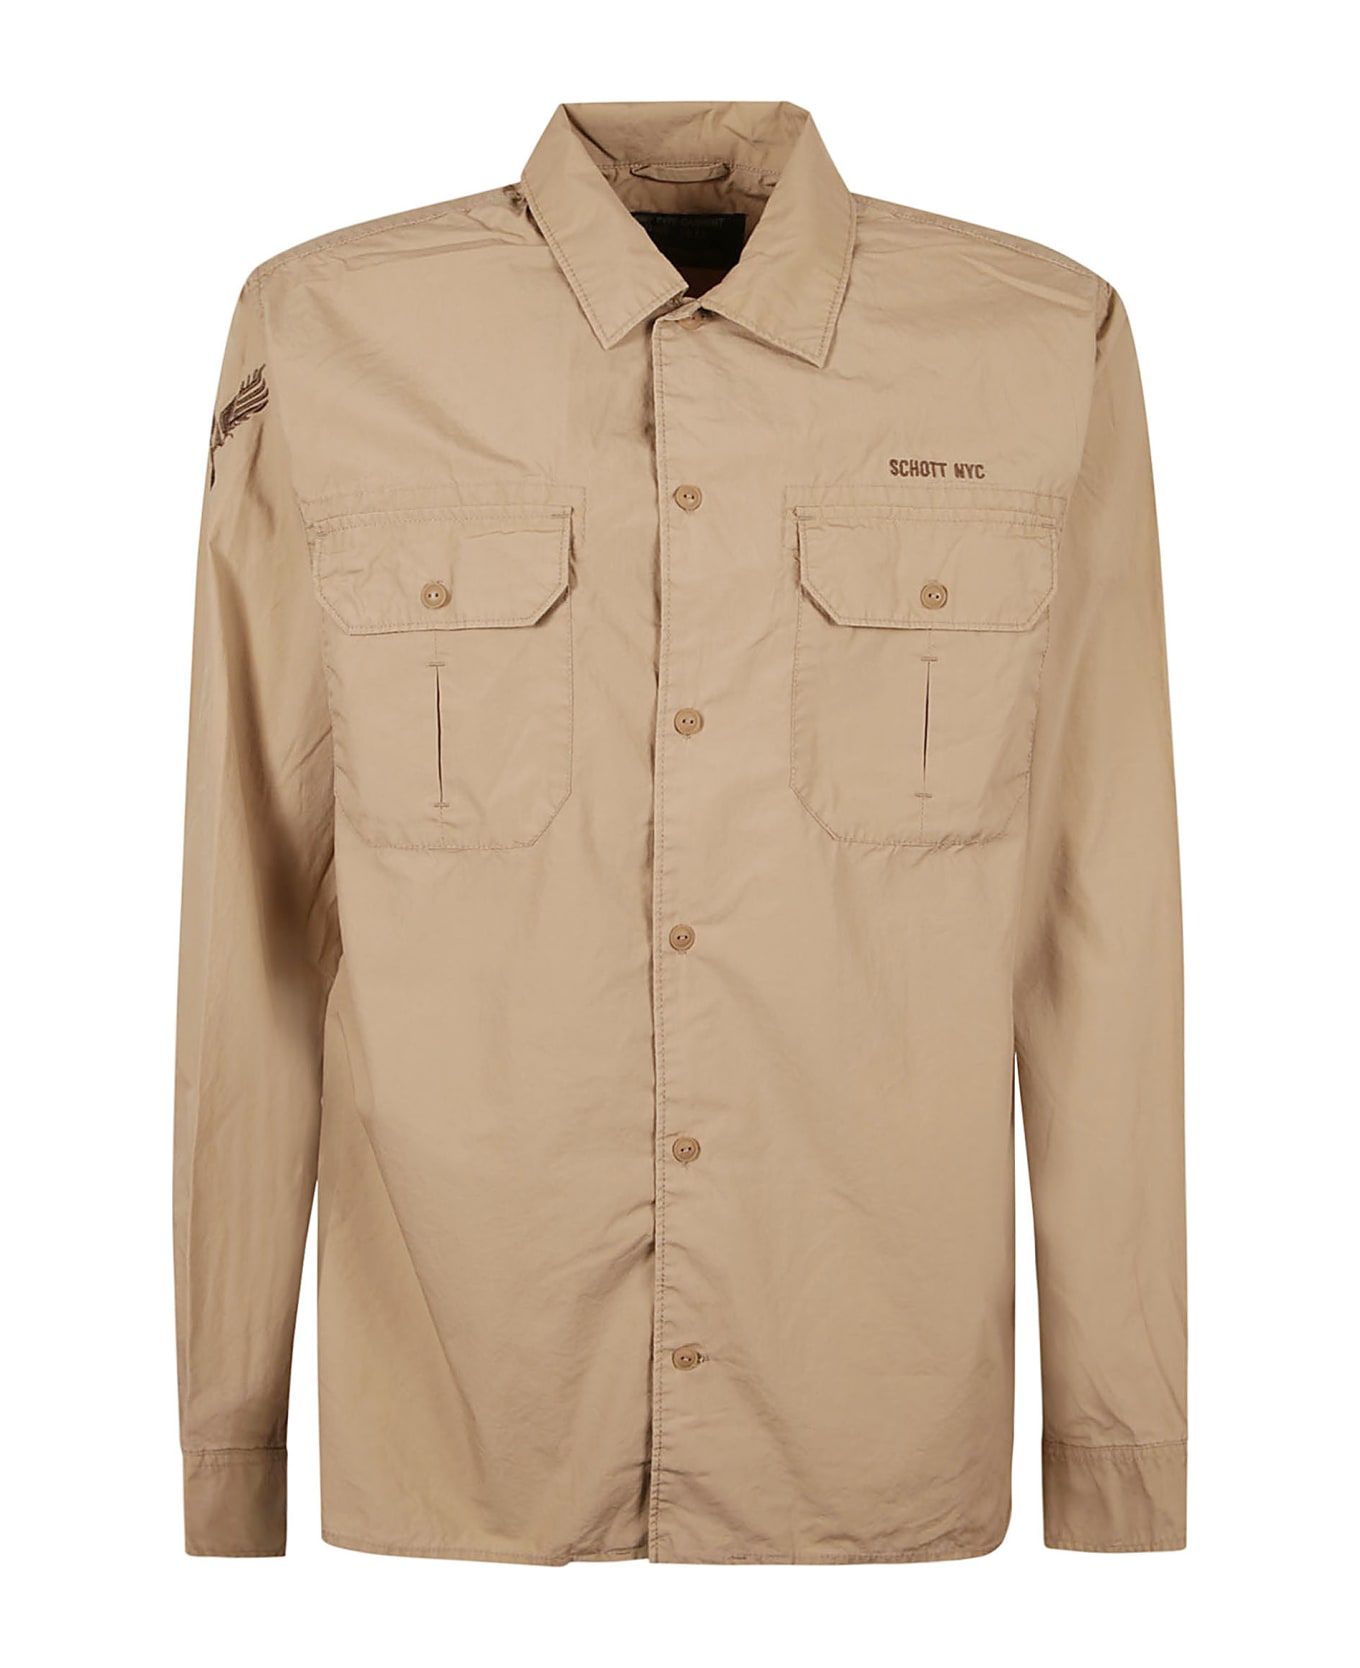 Schott NYC Patched Pocket Logo Embroidered Shirt - Beige